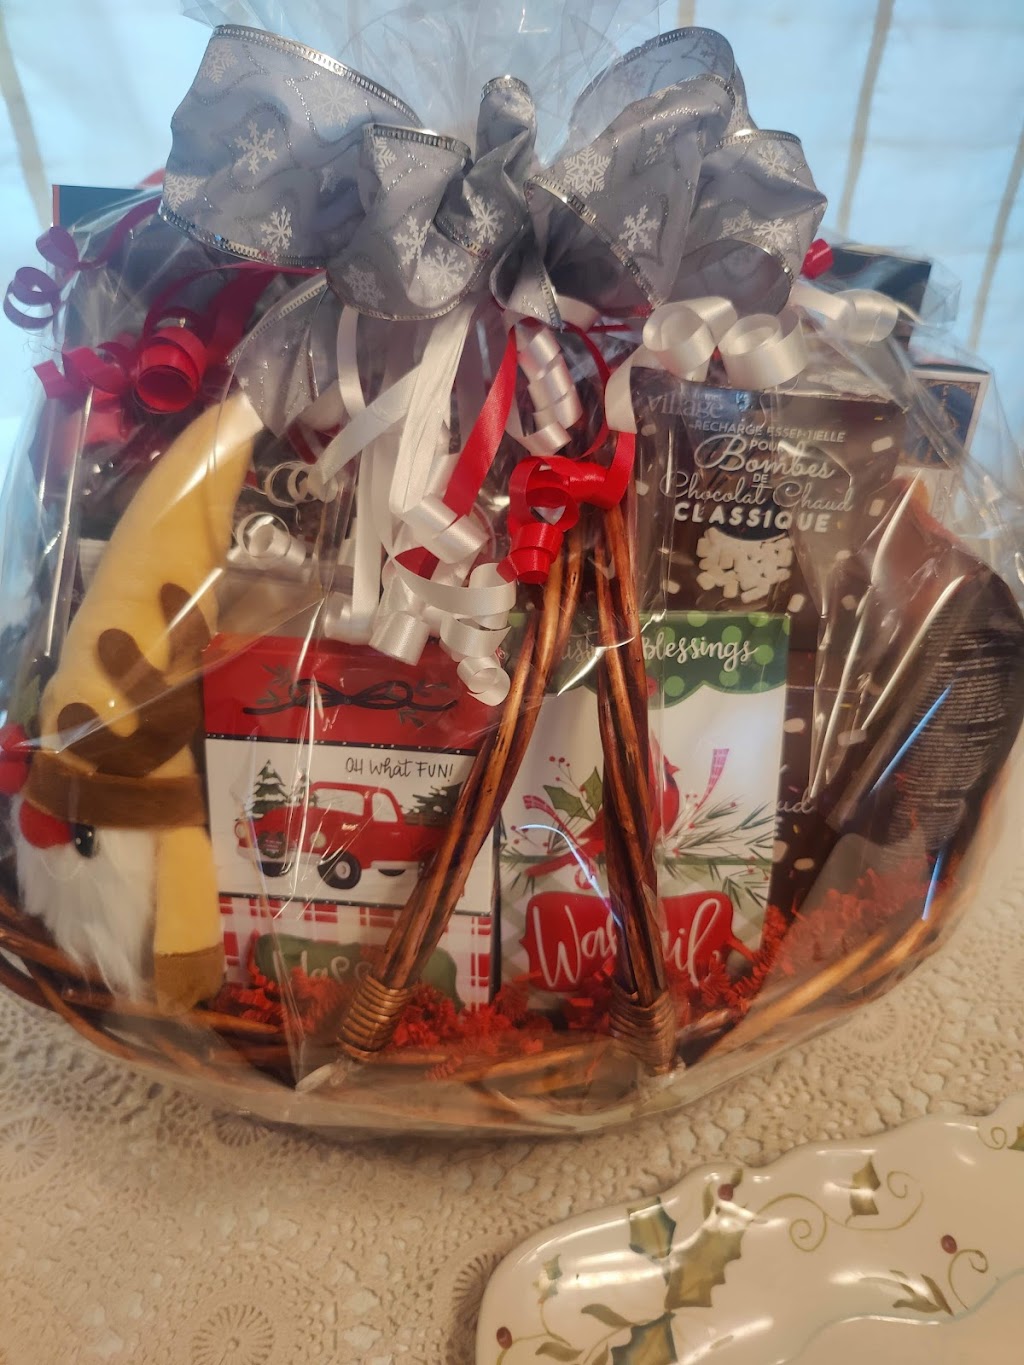 Somersvillage Gifts & Gourmet Baskets INC. | 111 Main St, Somers, CT 06071 | Phone: (860) 265-2282